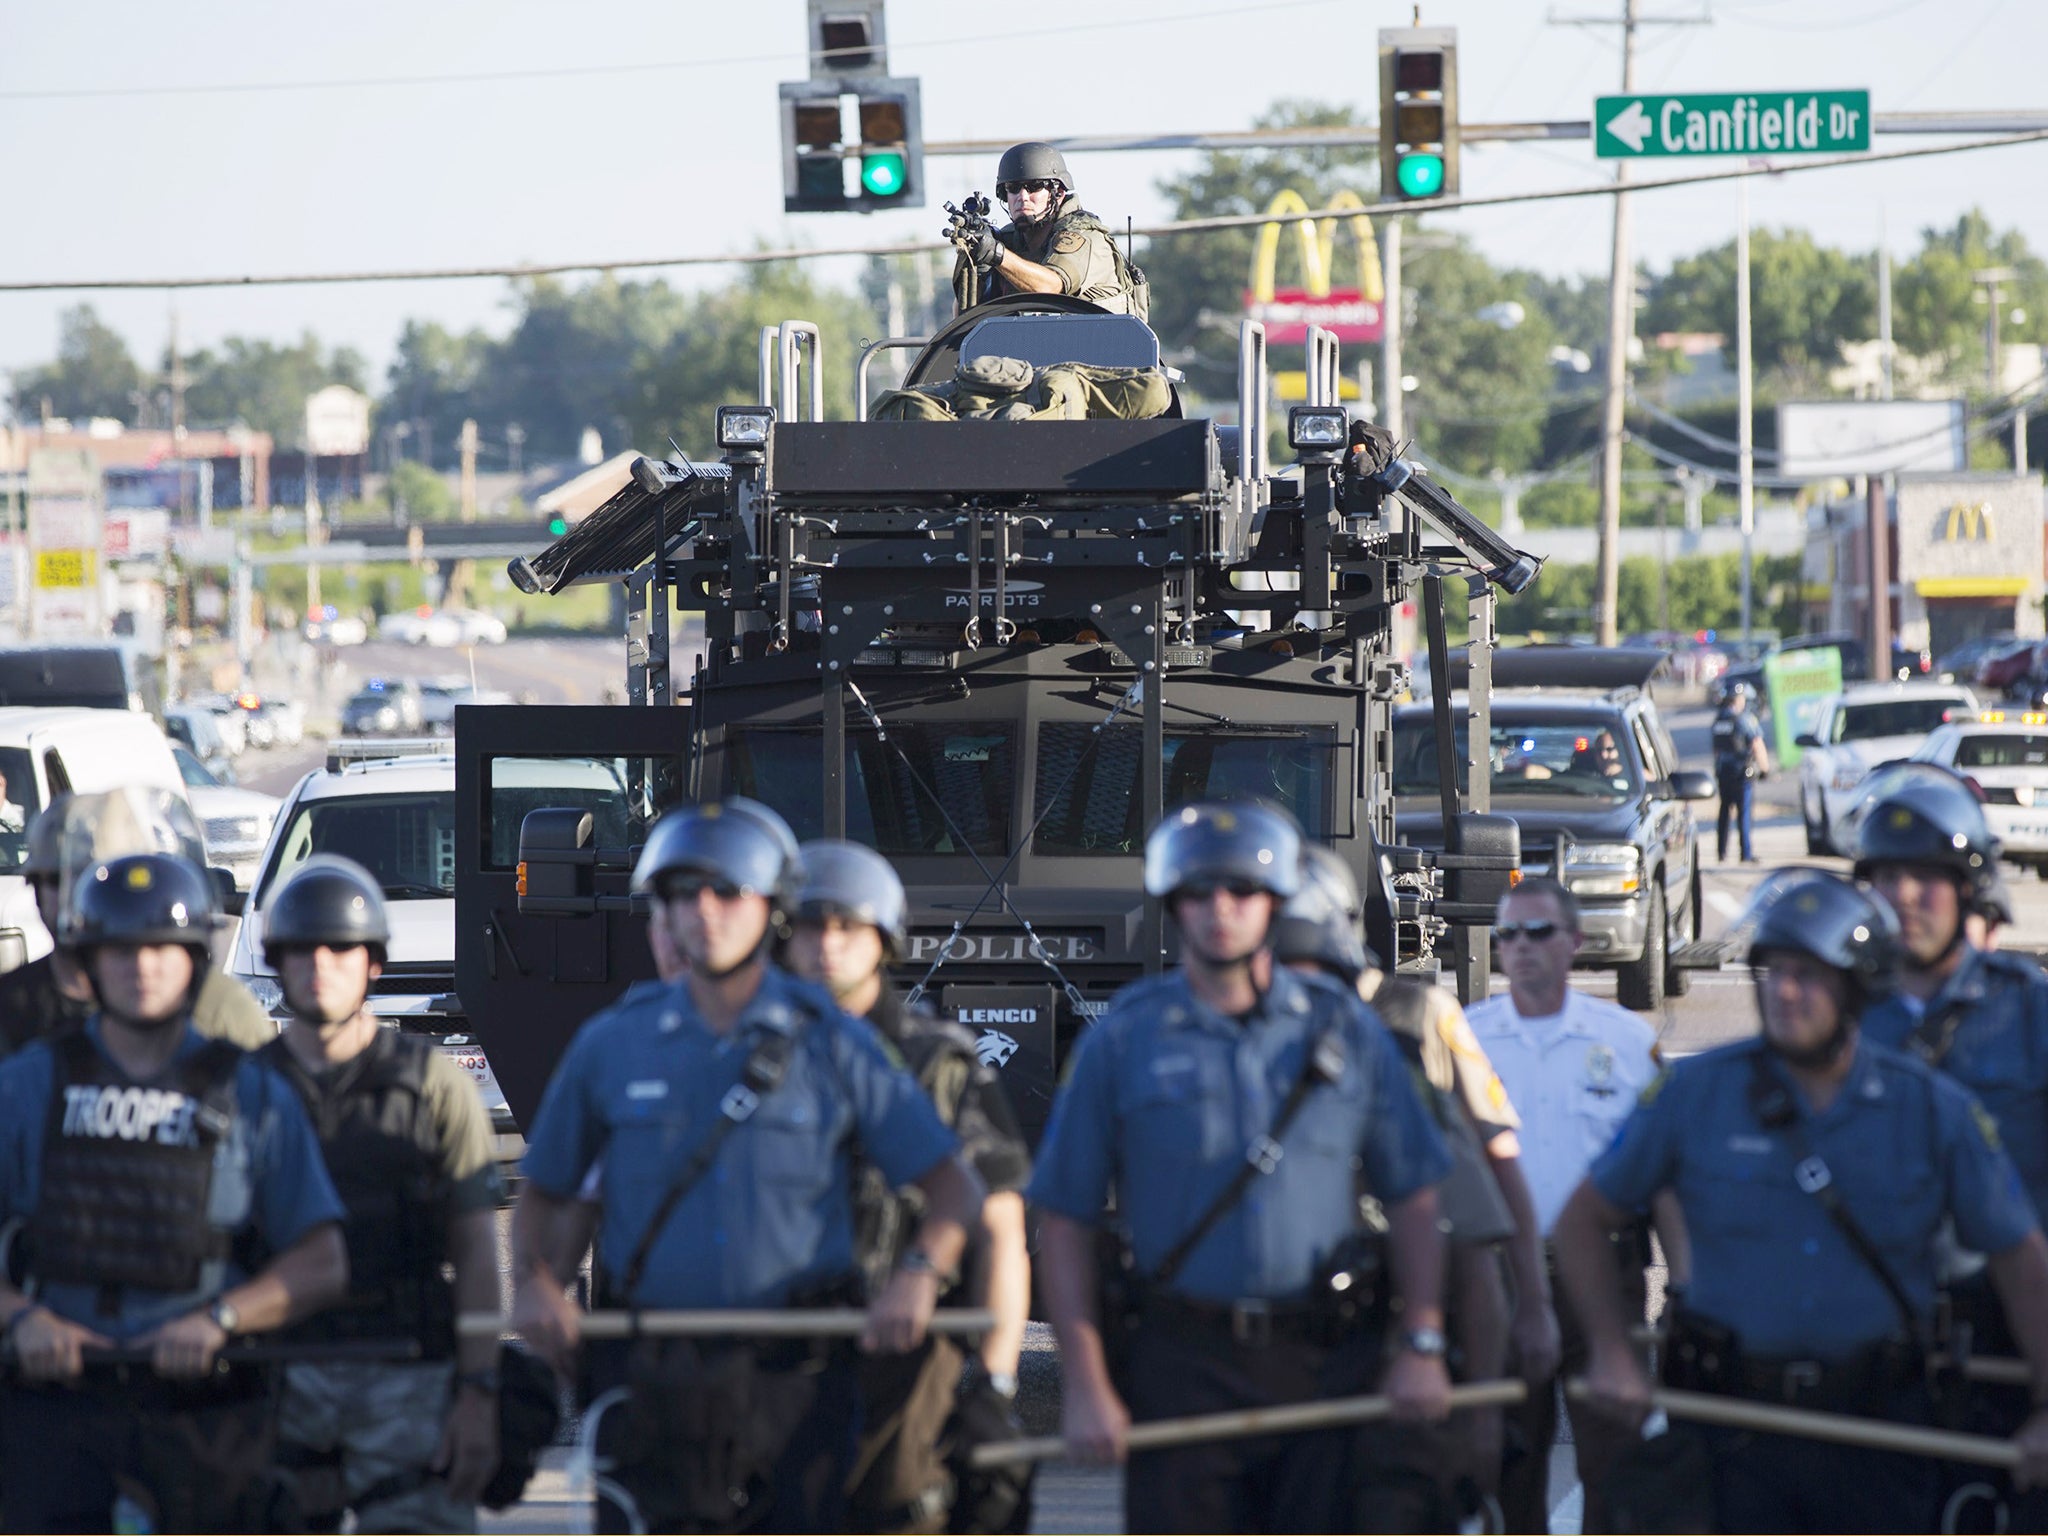 Riot police stand guard as demonstrators protest the shooting death of teenager Michael Brown in Ferguson